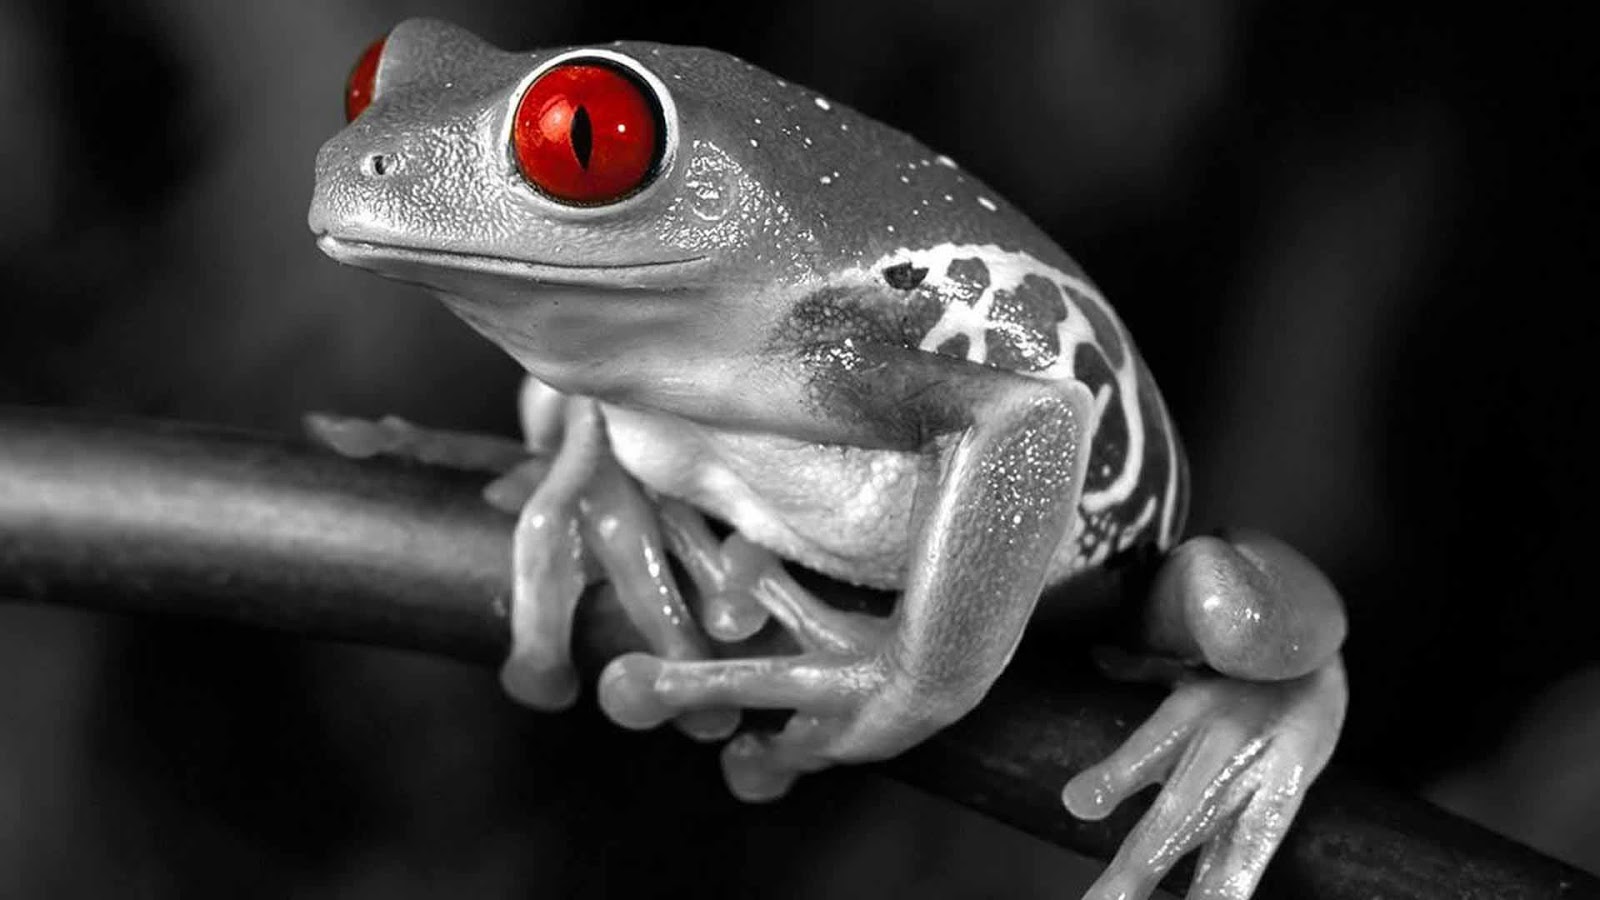 Hd Wallpapers 1080p Mario Wallpapers - Red Eye Frog Black And White - HD Wallpaper 